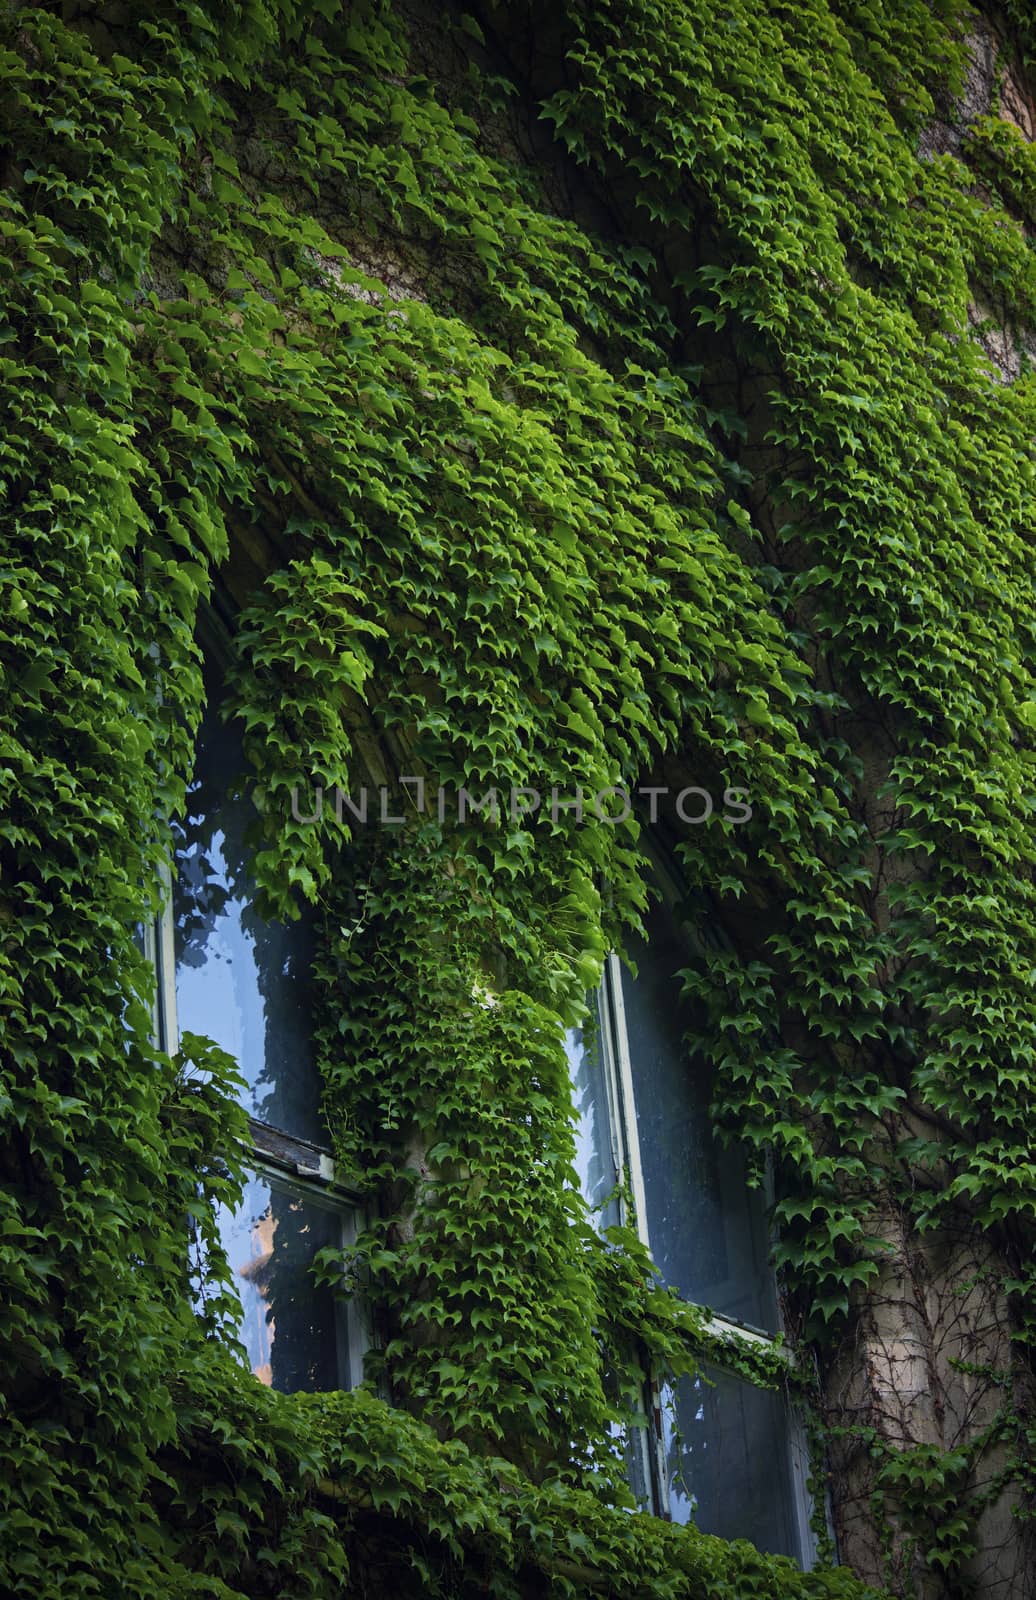 Stone wall and high windows covered in vines and ivy by Mendelex